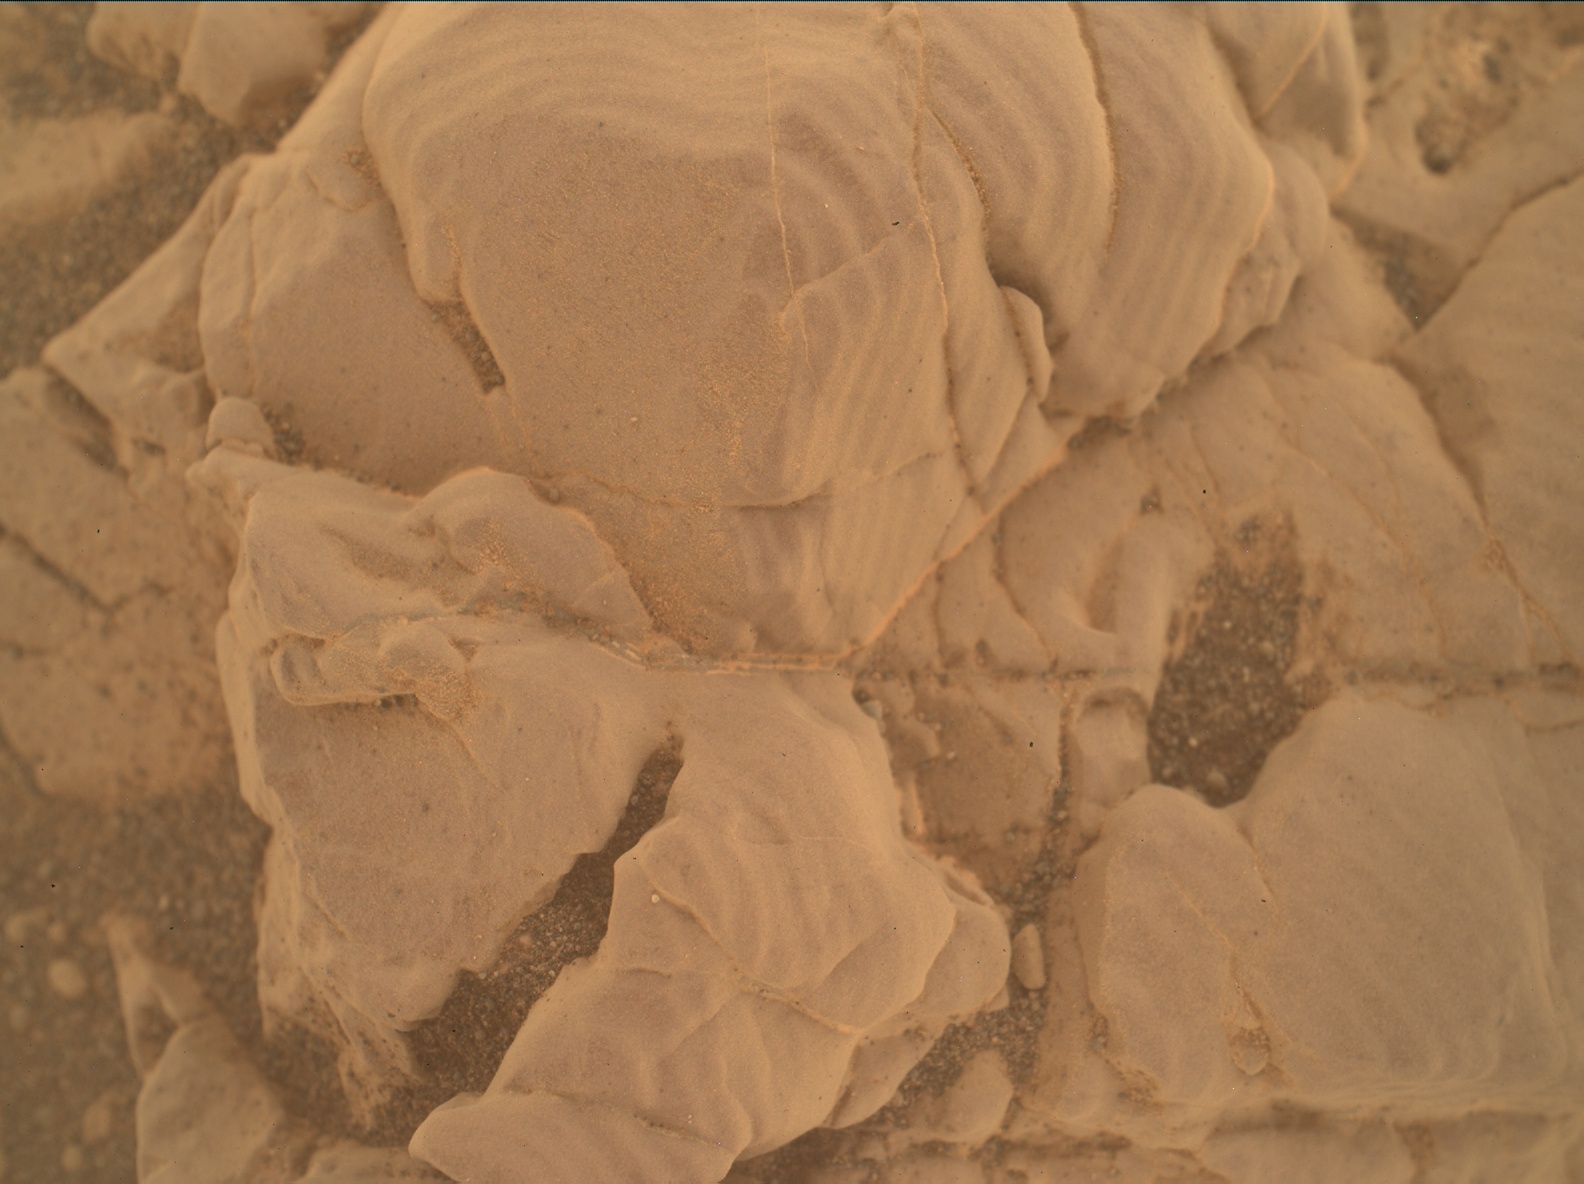 Nasa's Mars rover Curiosity acquired this image using its Mars Hand Lens Imager (MAHLI) on Sol 3076